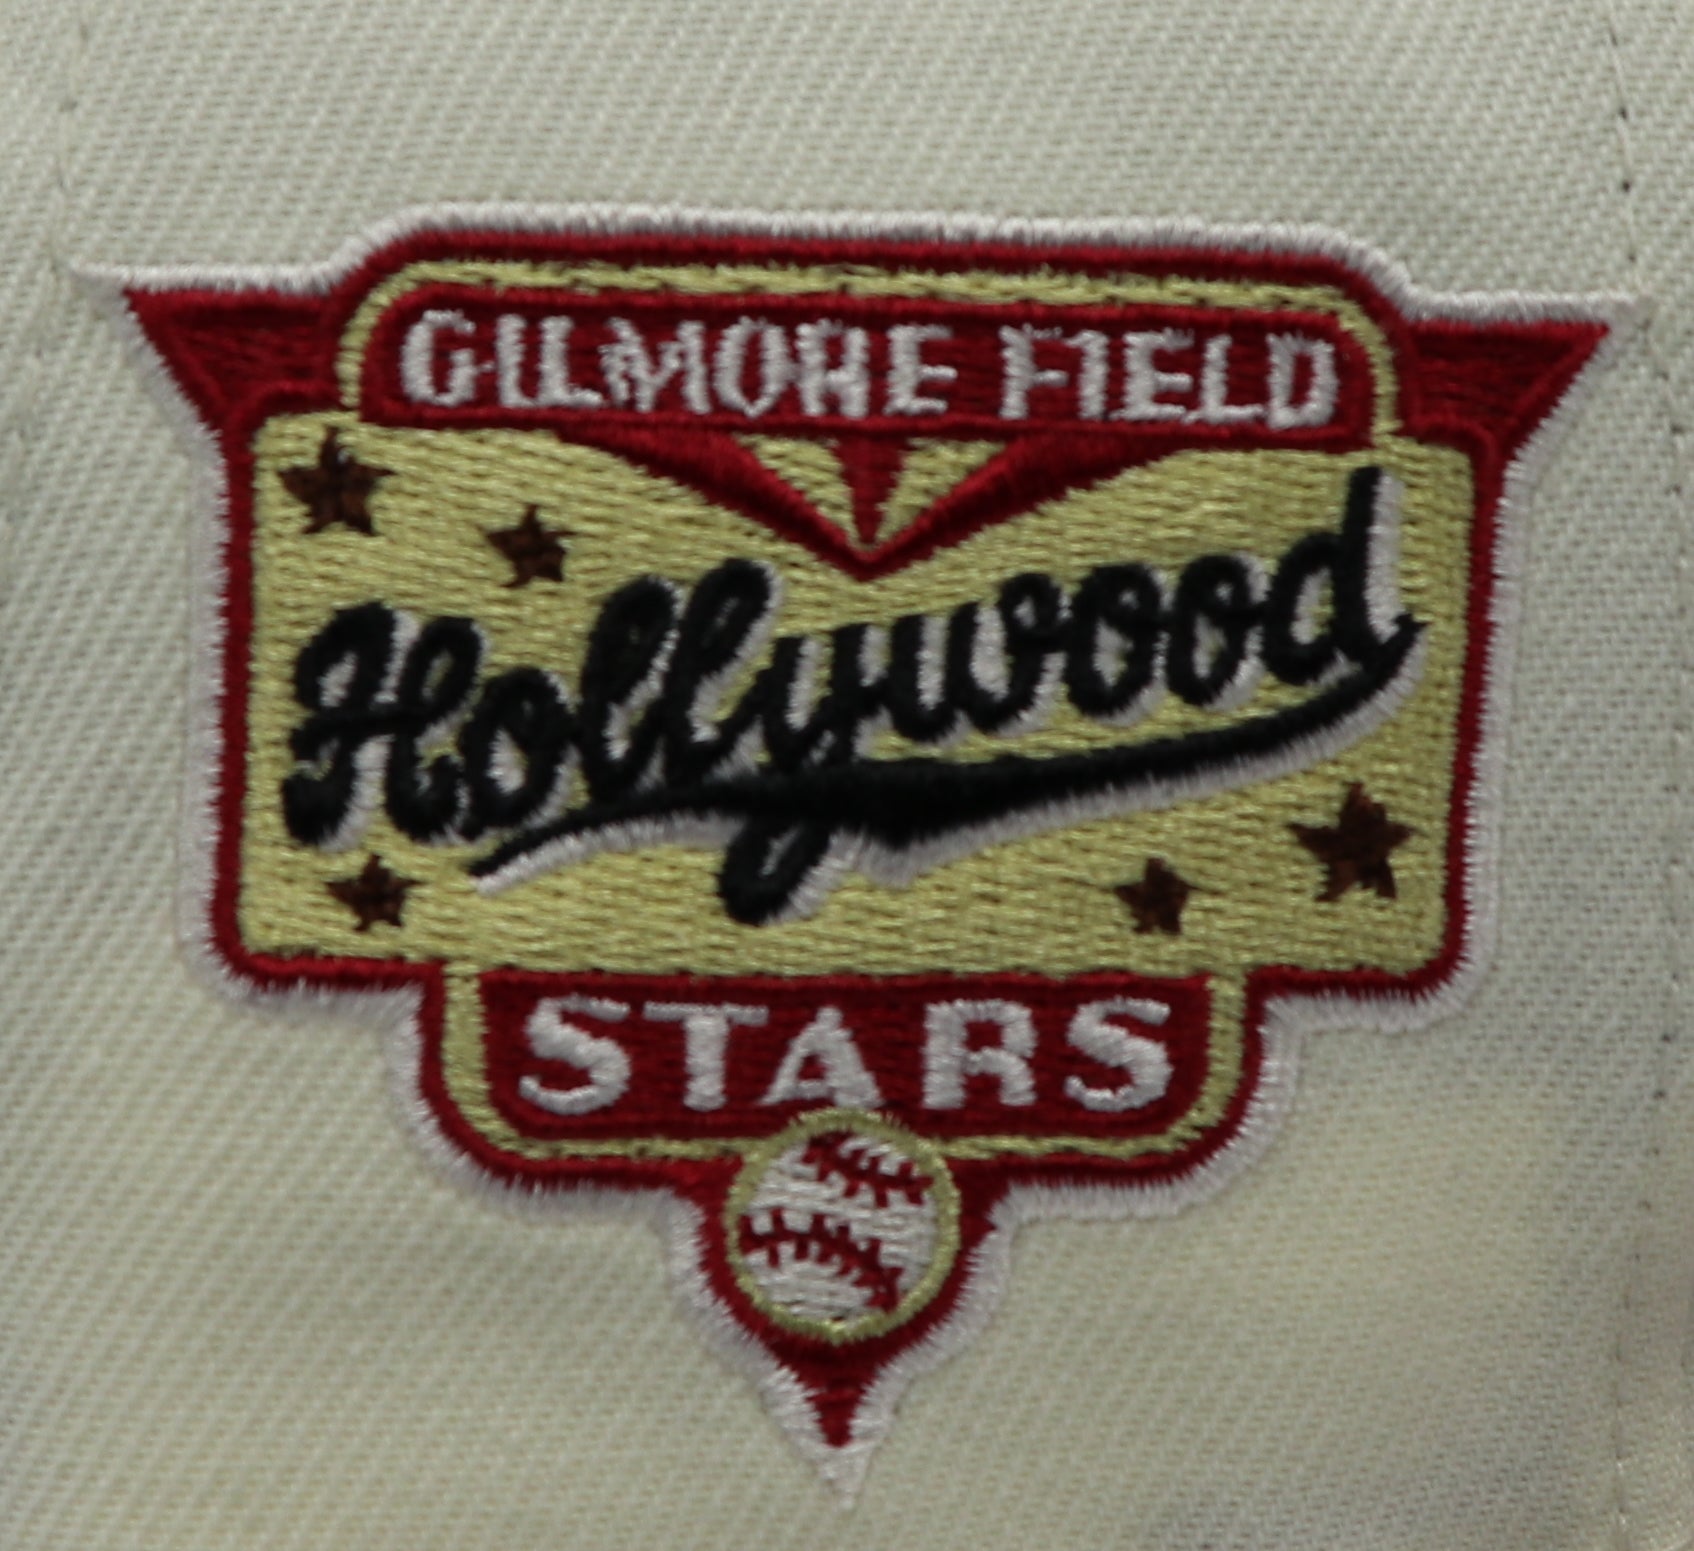 HOLLYWOOD STARS (OFF-WHITE) (GILMORE FIELD) NEW ERA 59FIFTY FITTED (T-PEANUT UNDER VISOR)